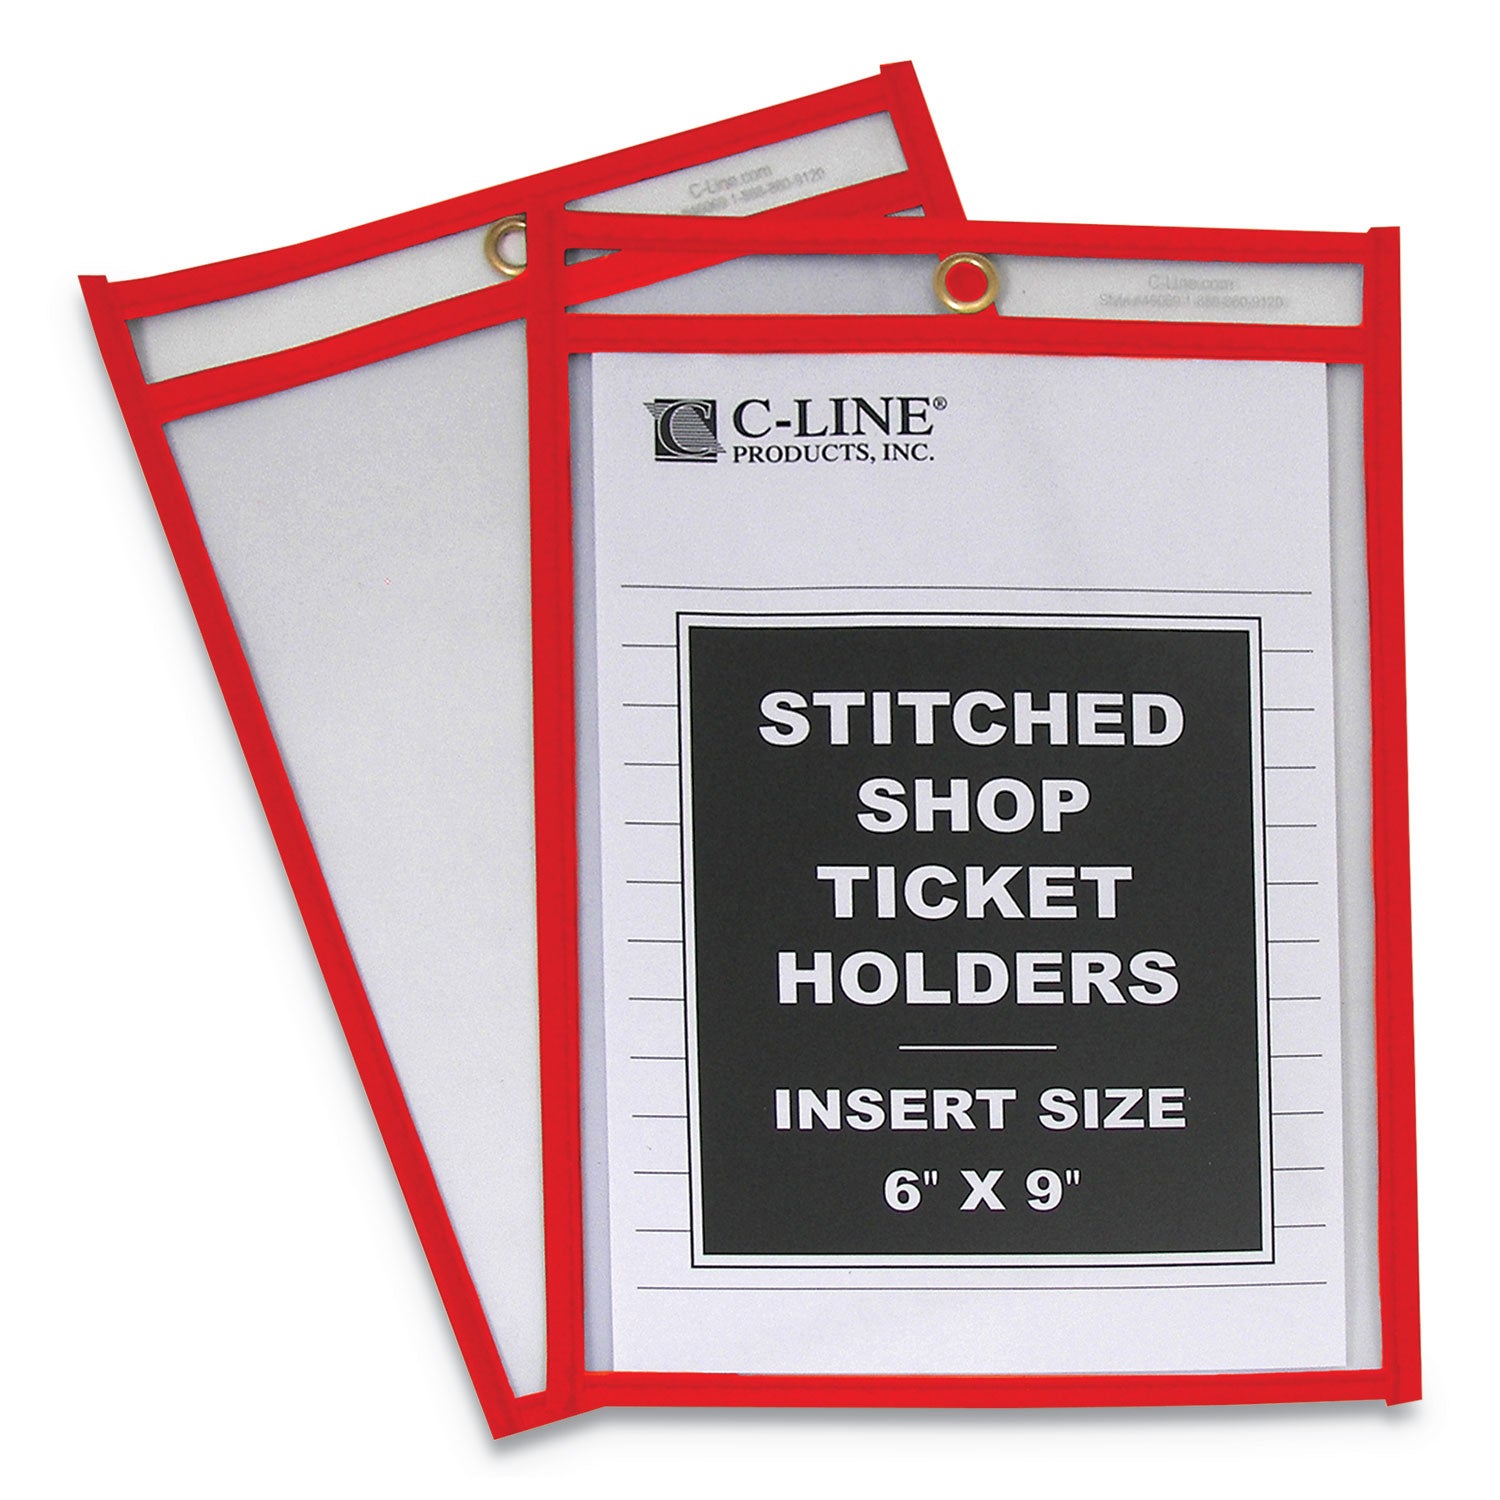 stitched-shop-ticket-holders-top-load-super-heavy-clear-6-x-9-inserts-25-box_cli43969 - 1